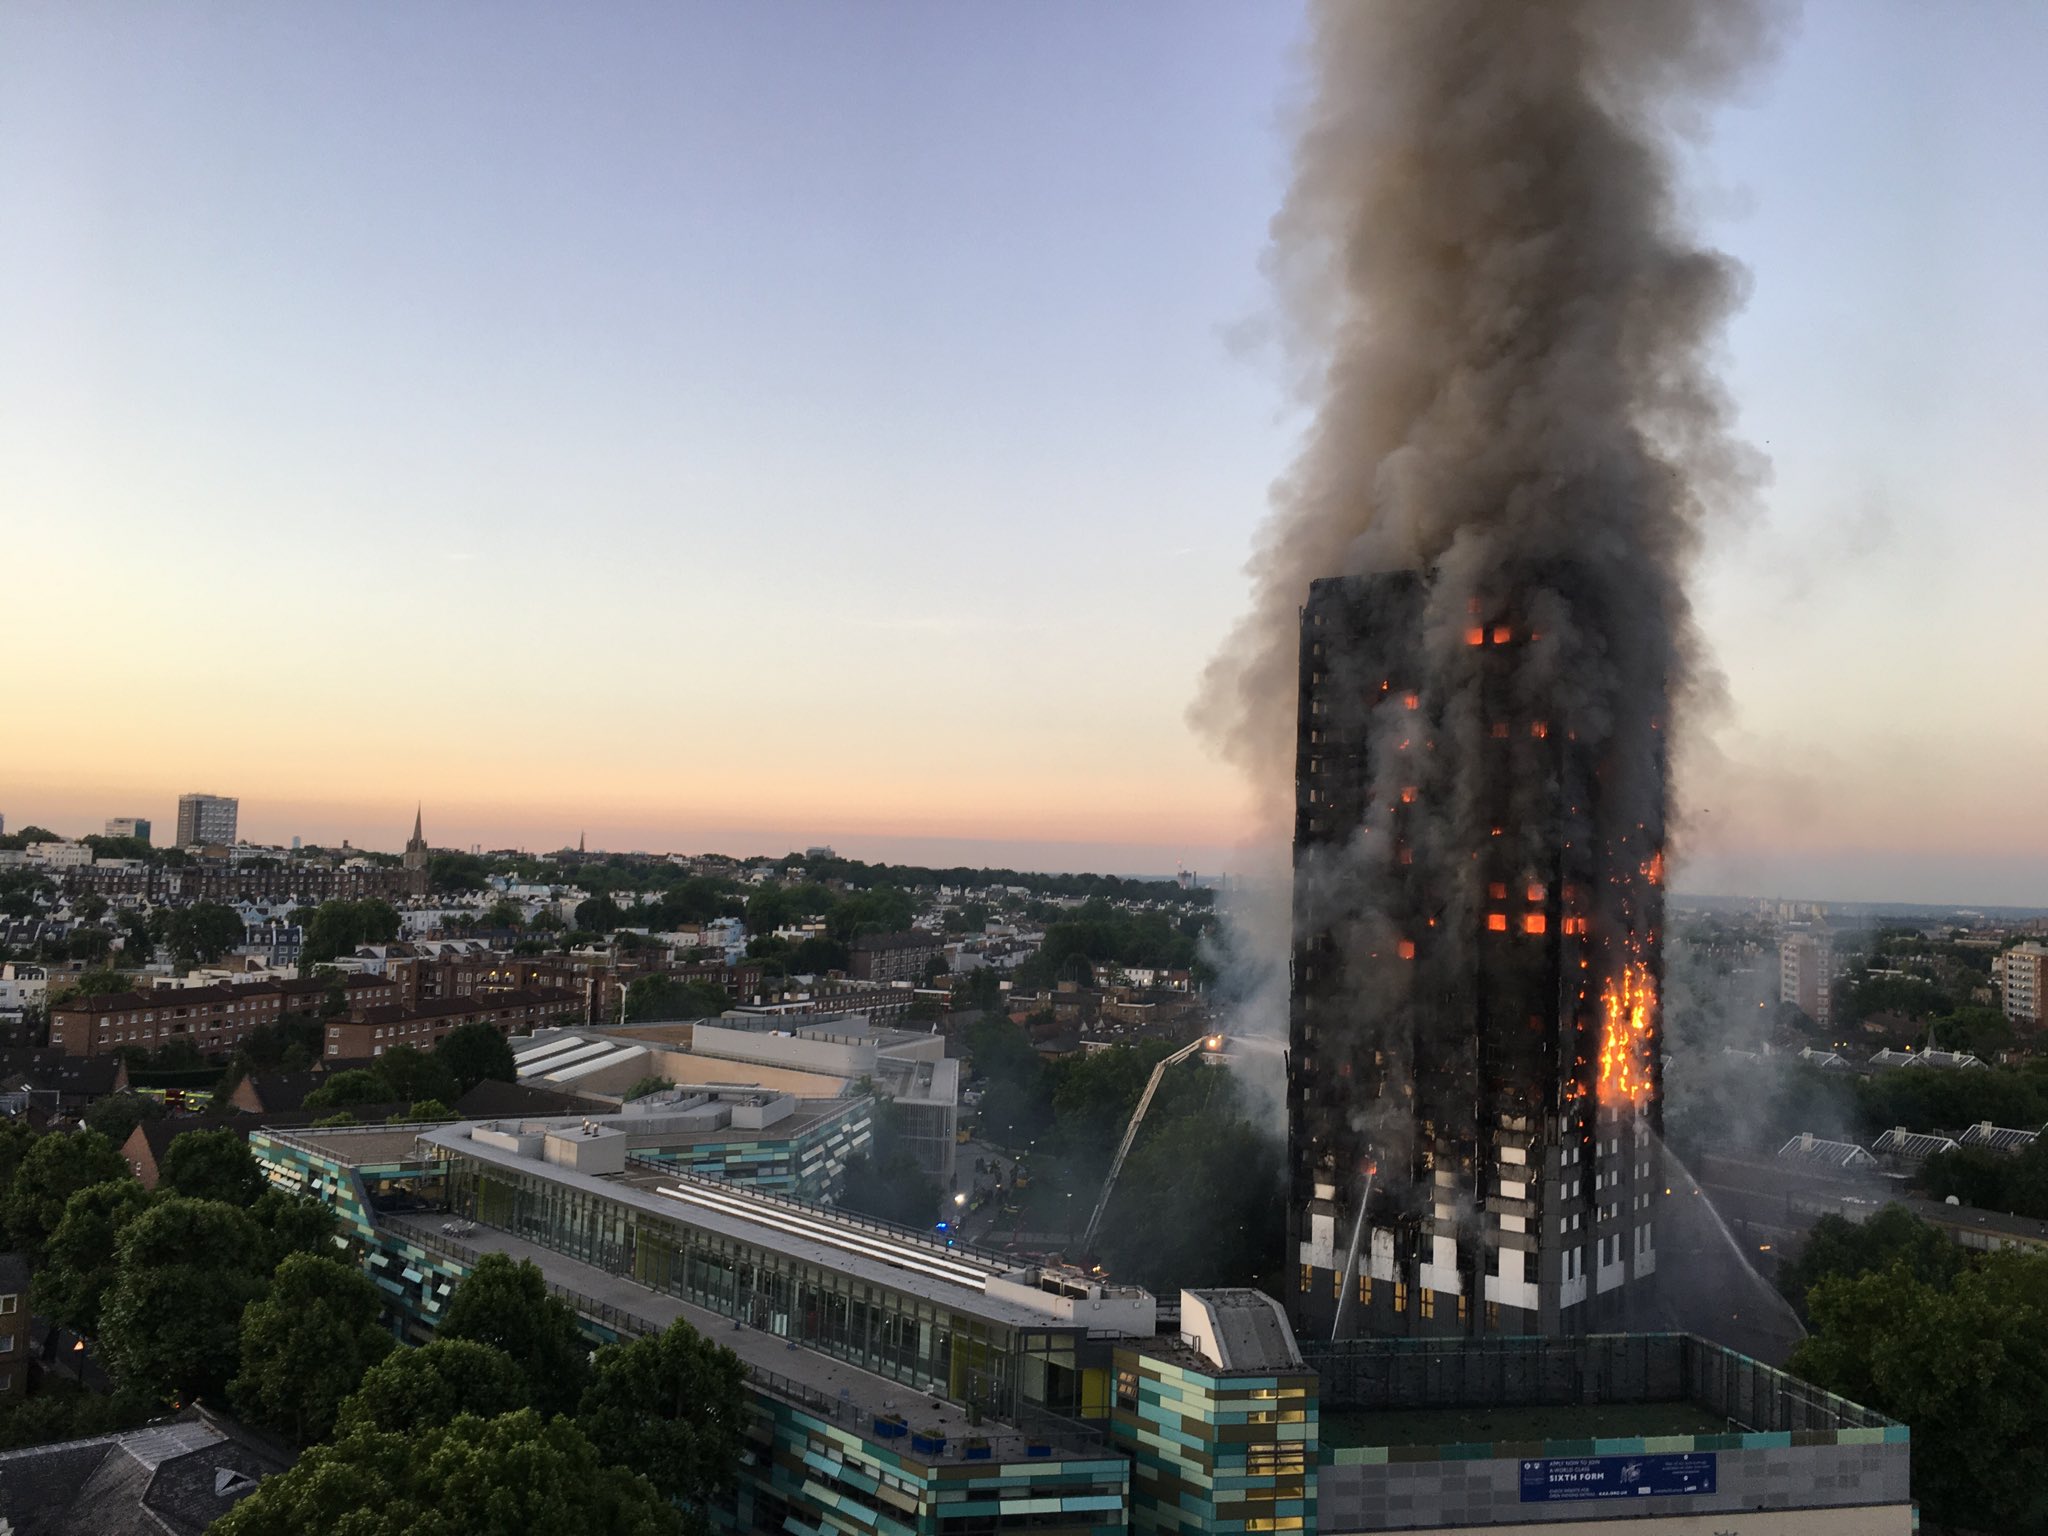 Grenfell Tower in west London burns with the city in the background.